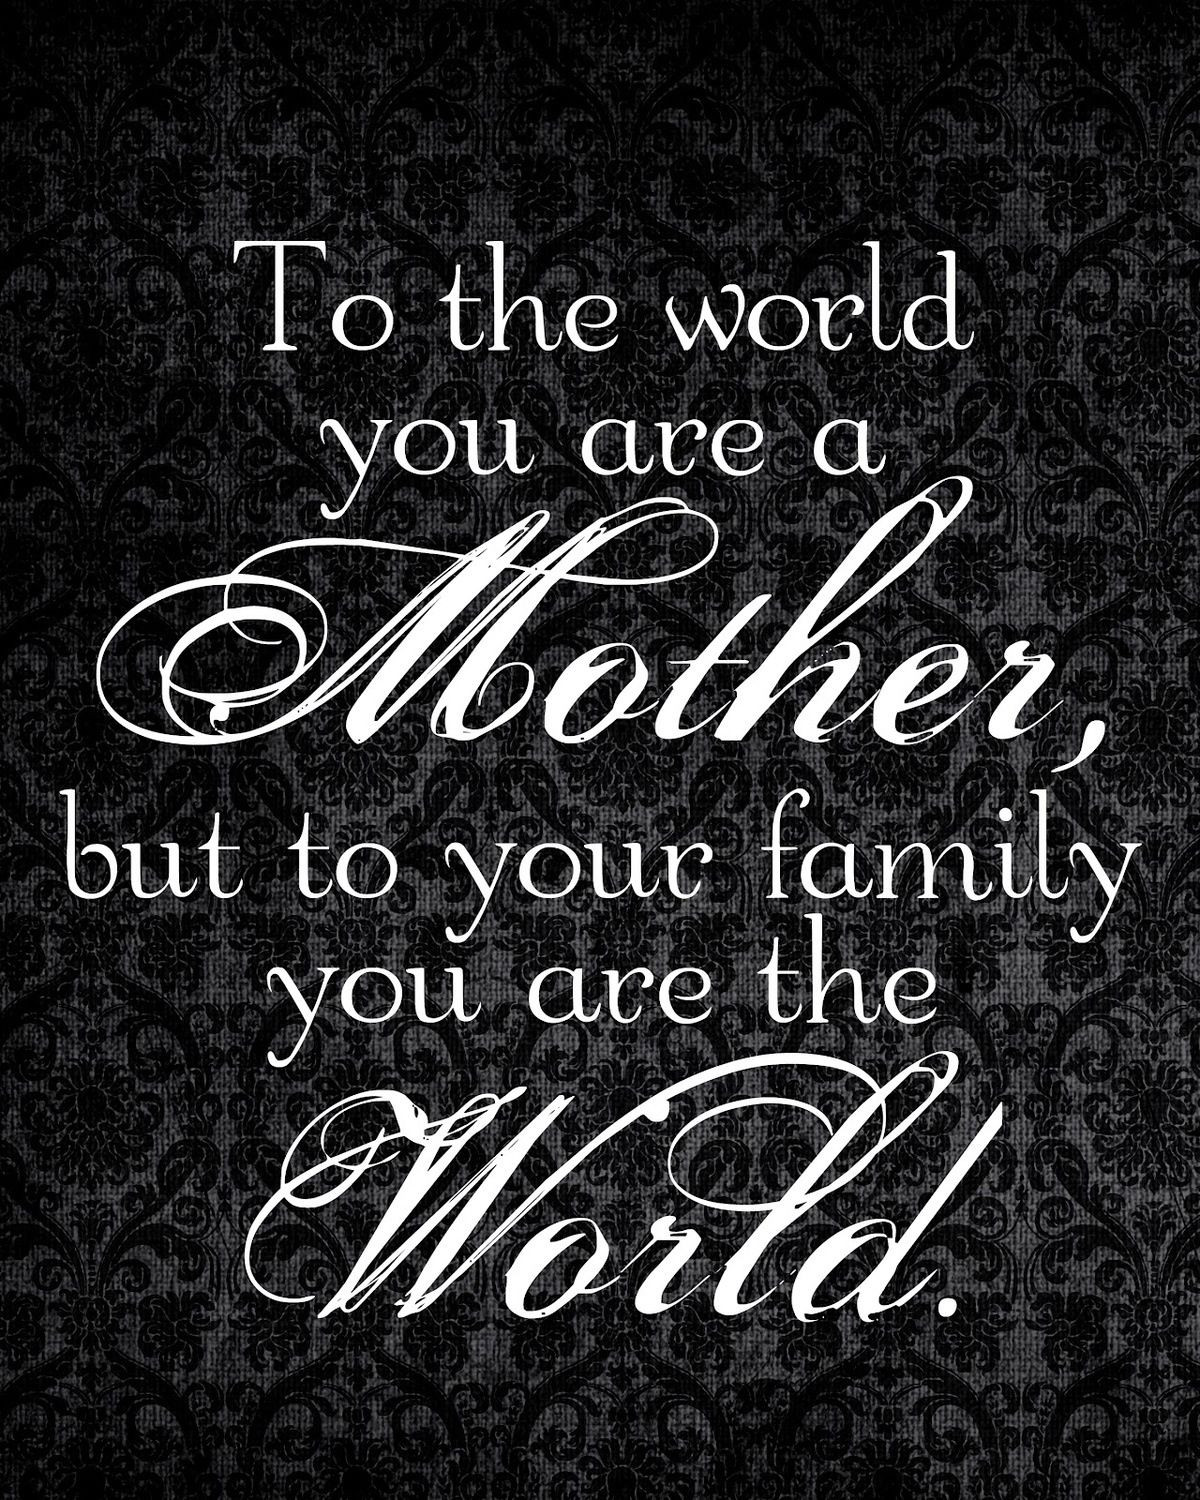 Quote For Mother
 Best 25 Family love quotes ideas on Pinterest